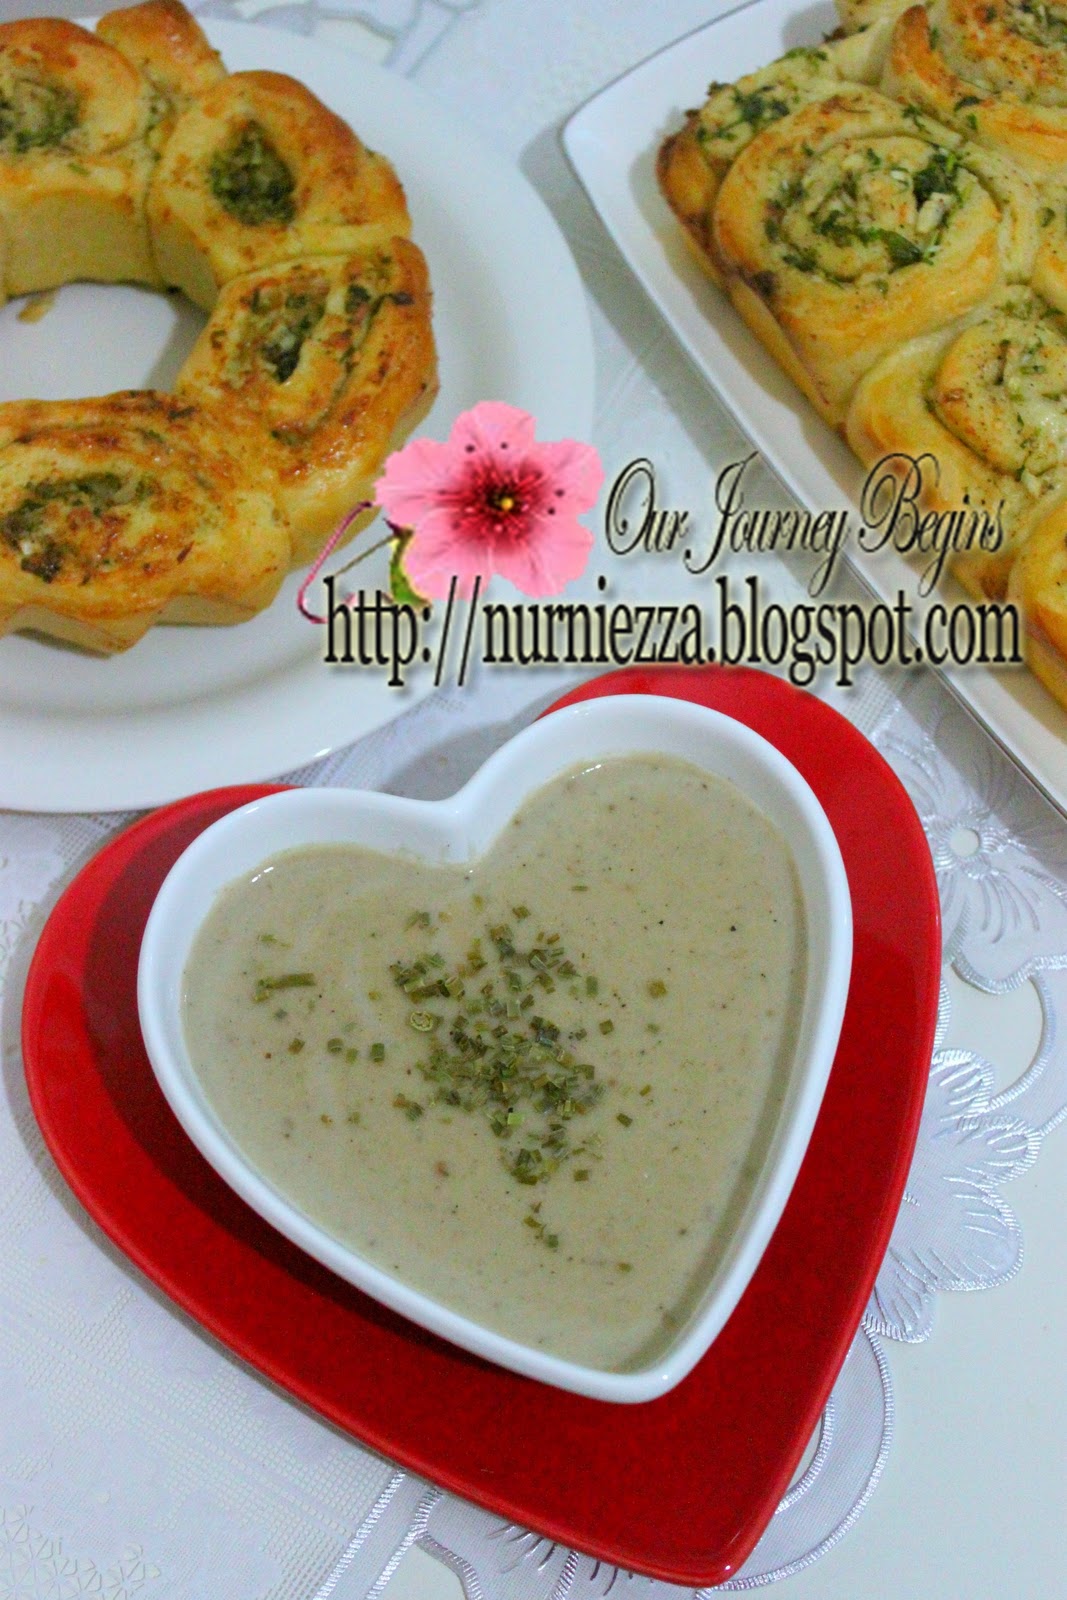 Our Journey Begins: Mushroom Soup With Garlic Rolls